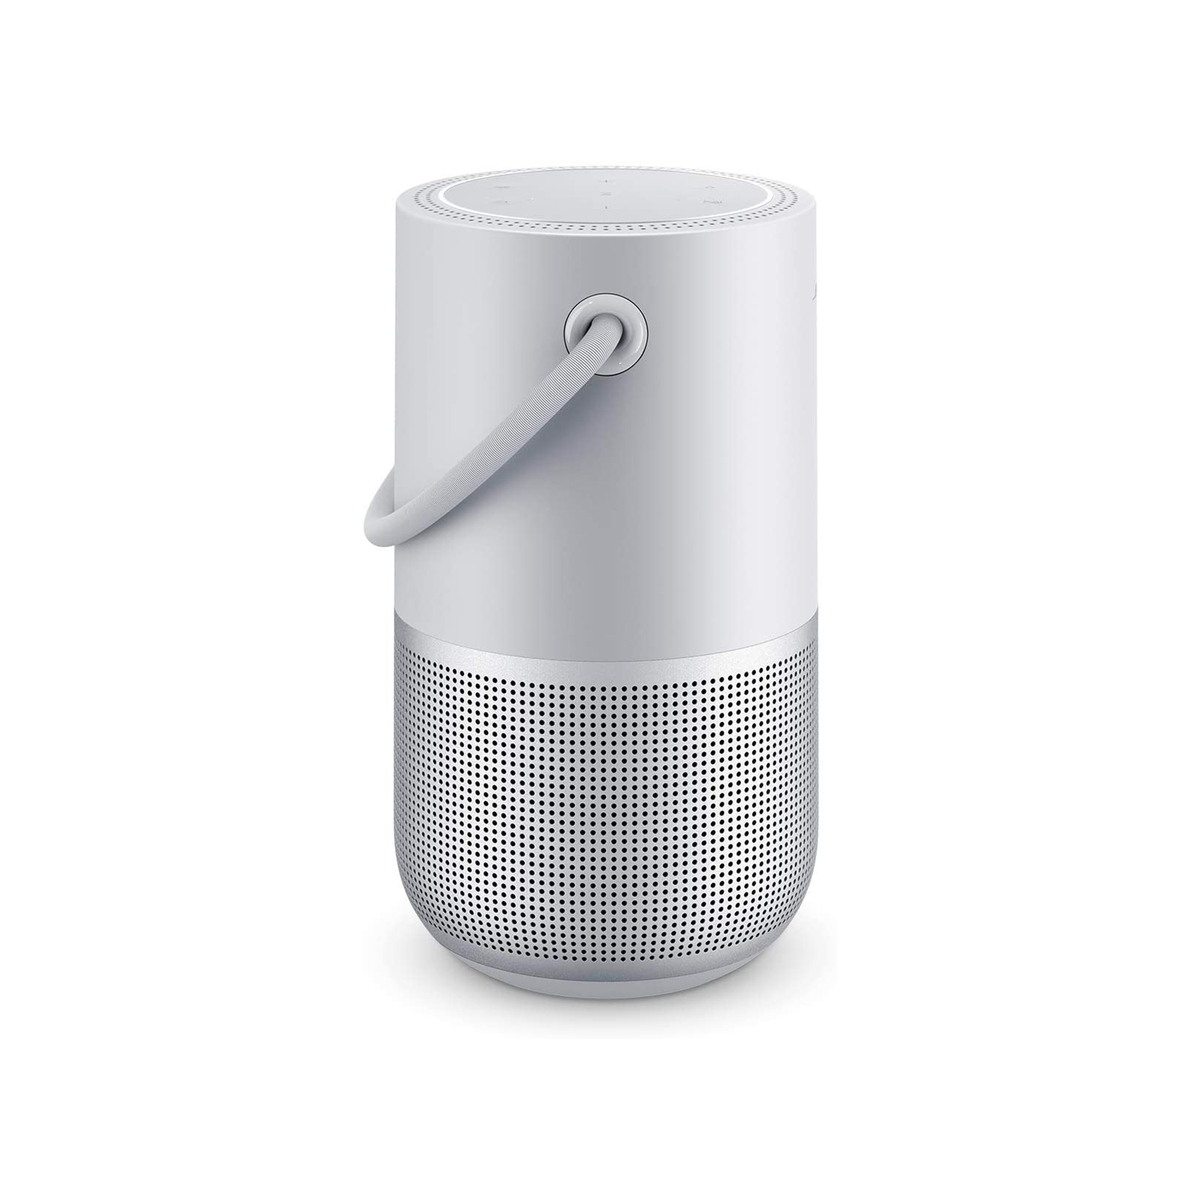 Bose Portable Smart Speaker 829393-4300 With Bluetooth, Wi-Fi and Airplay